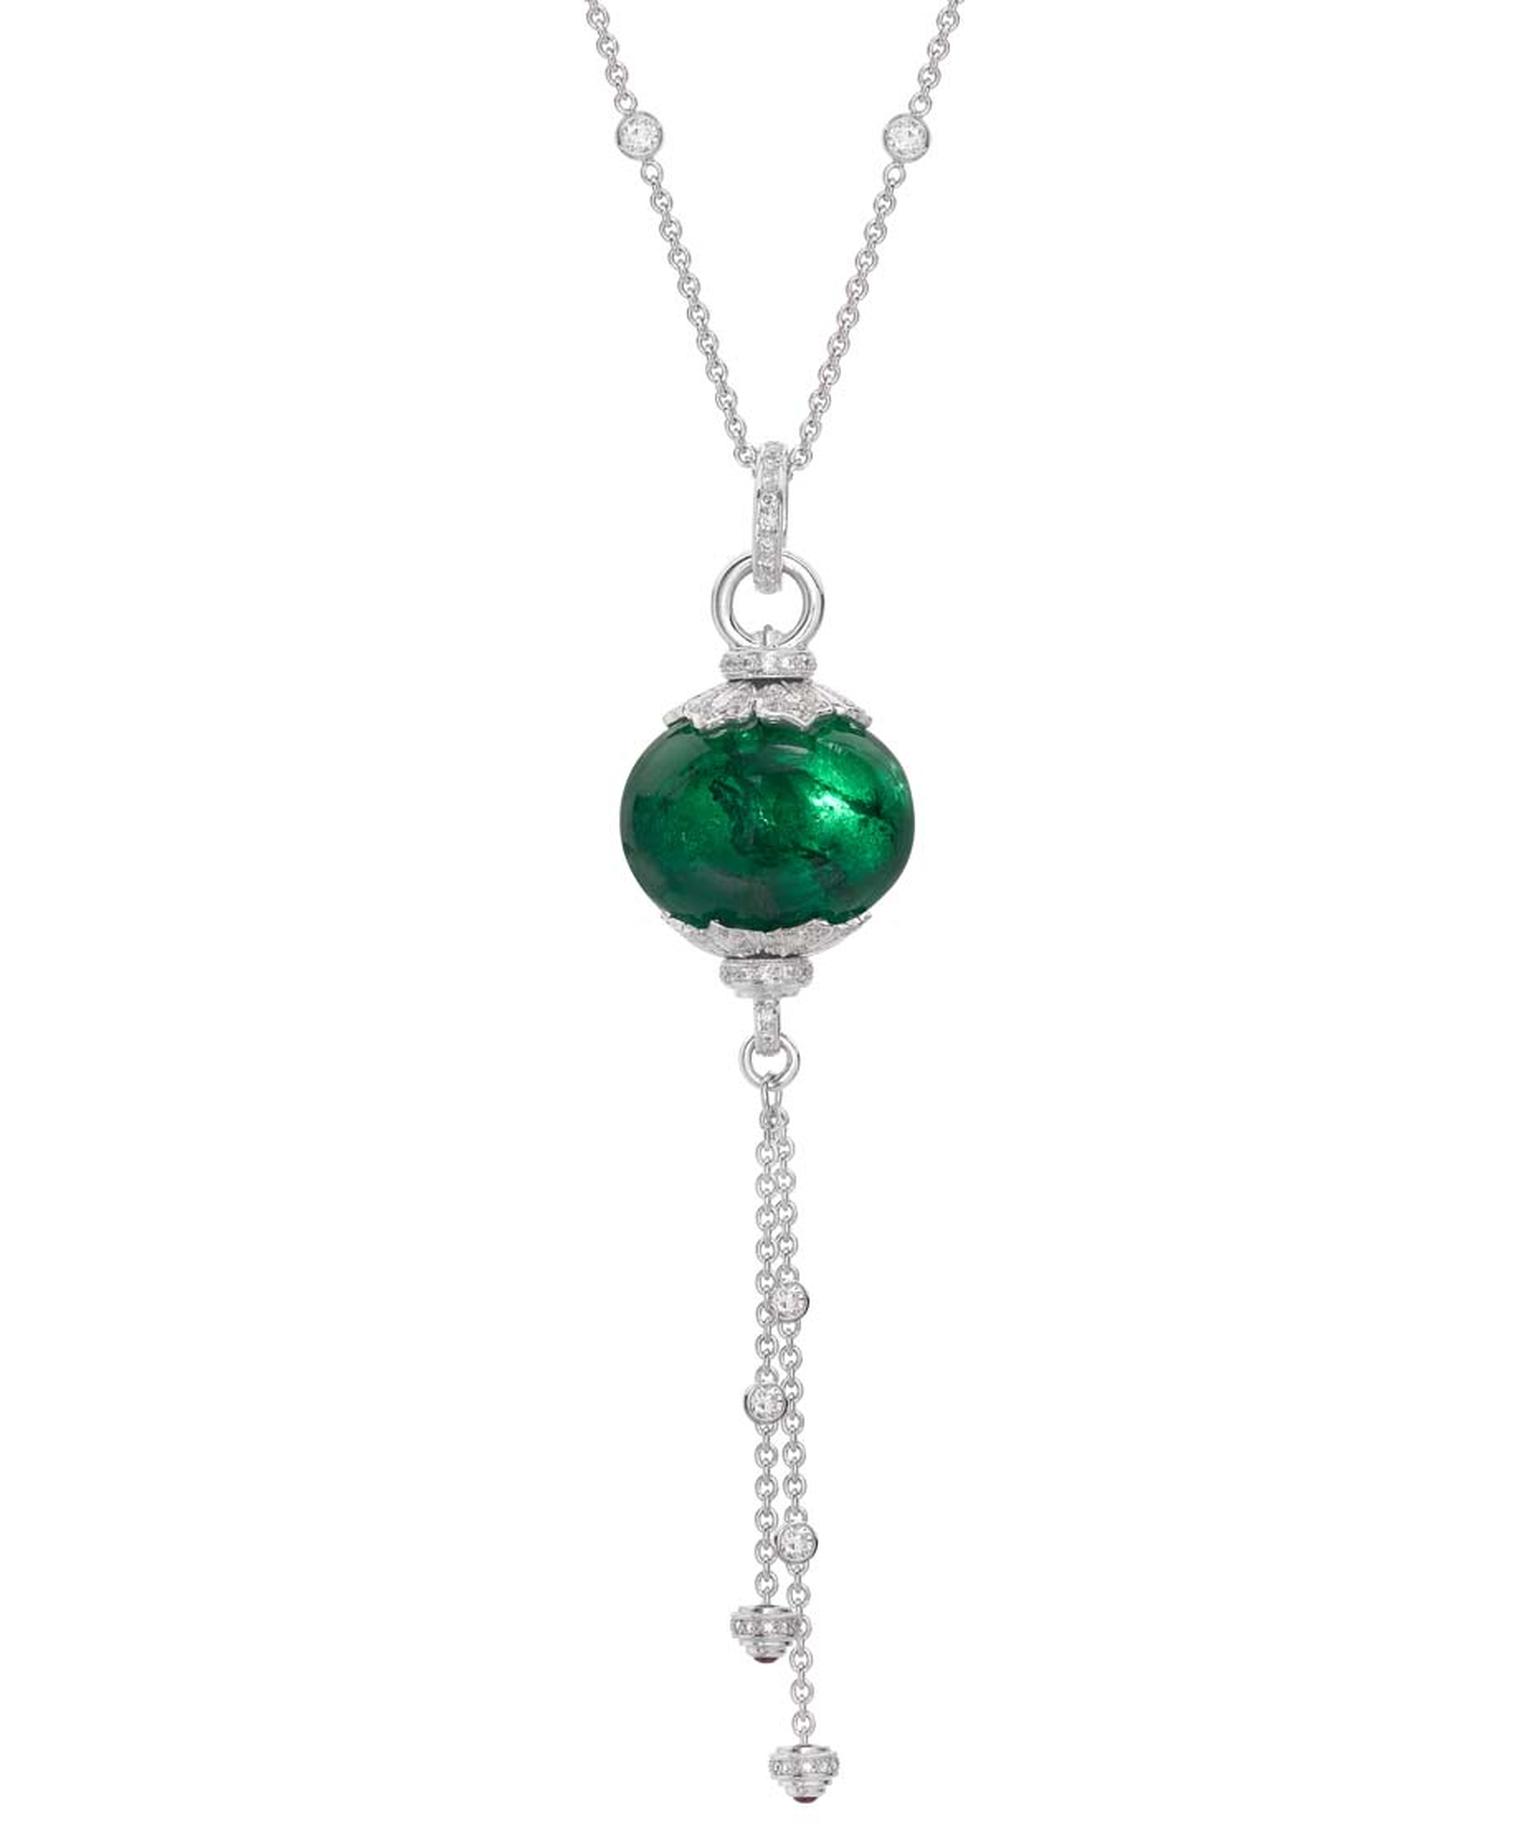 Theo Fennell white gold necklace with pavé diamonds and a Gemfields emerald bead necklace (65.30ct).